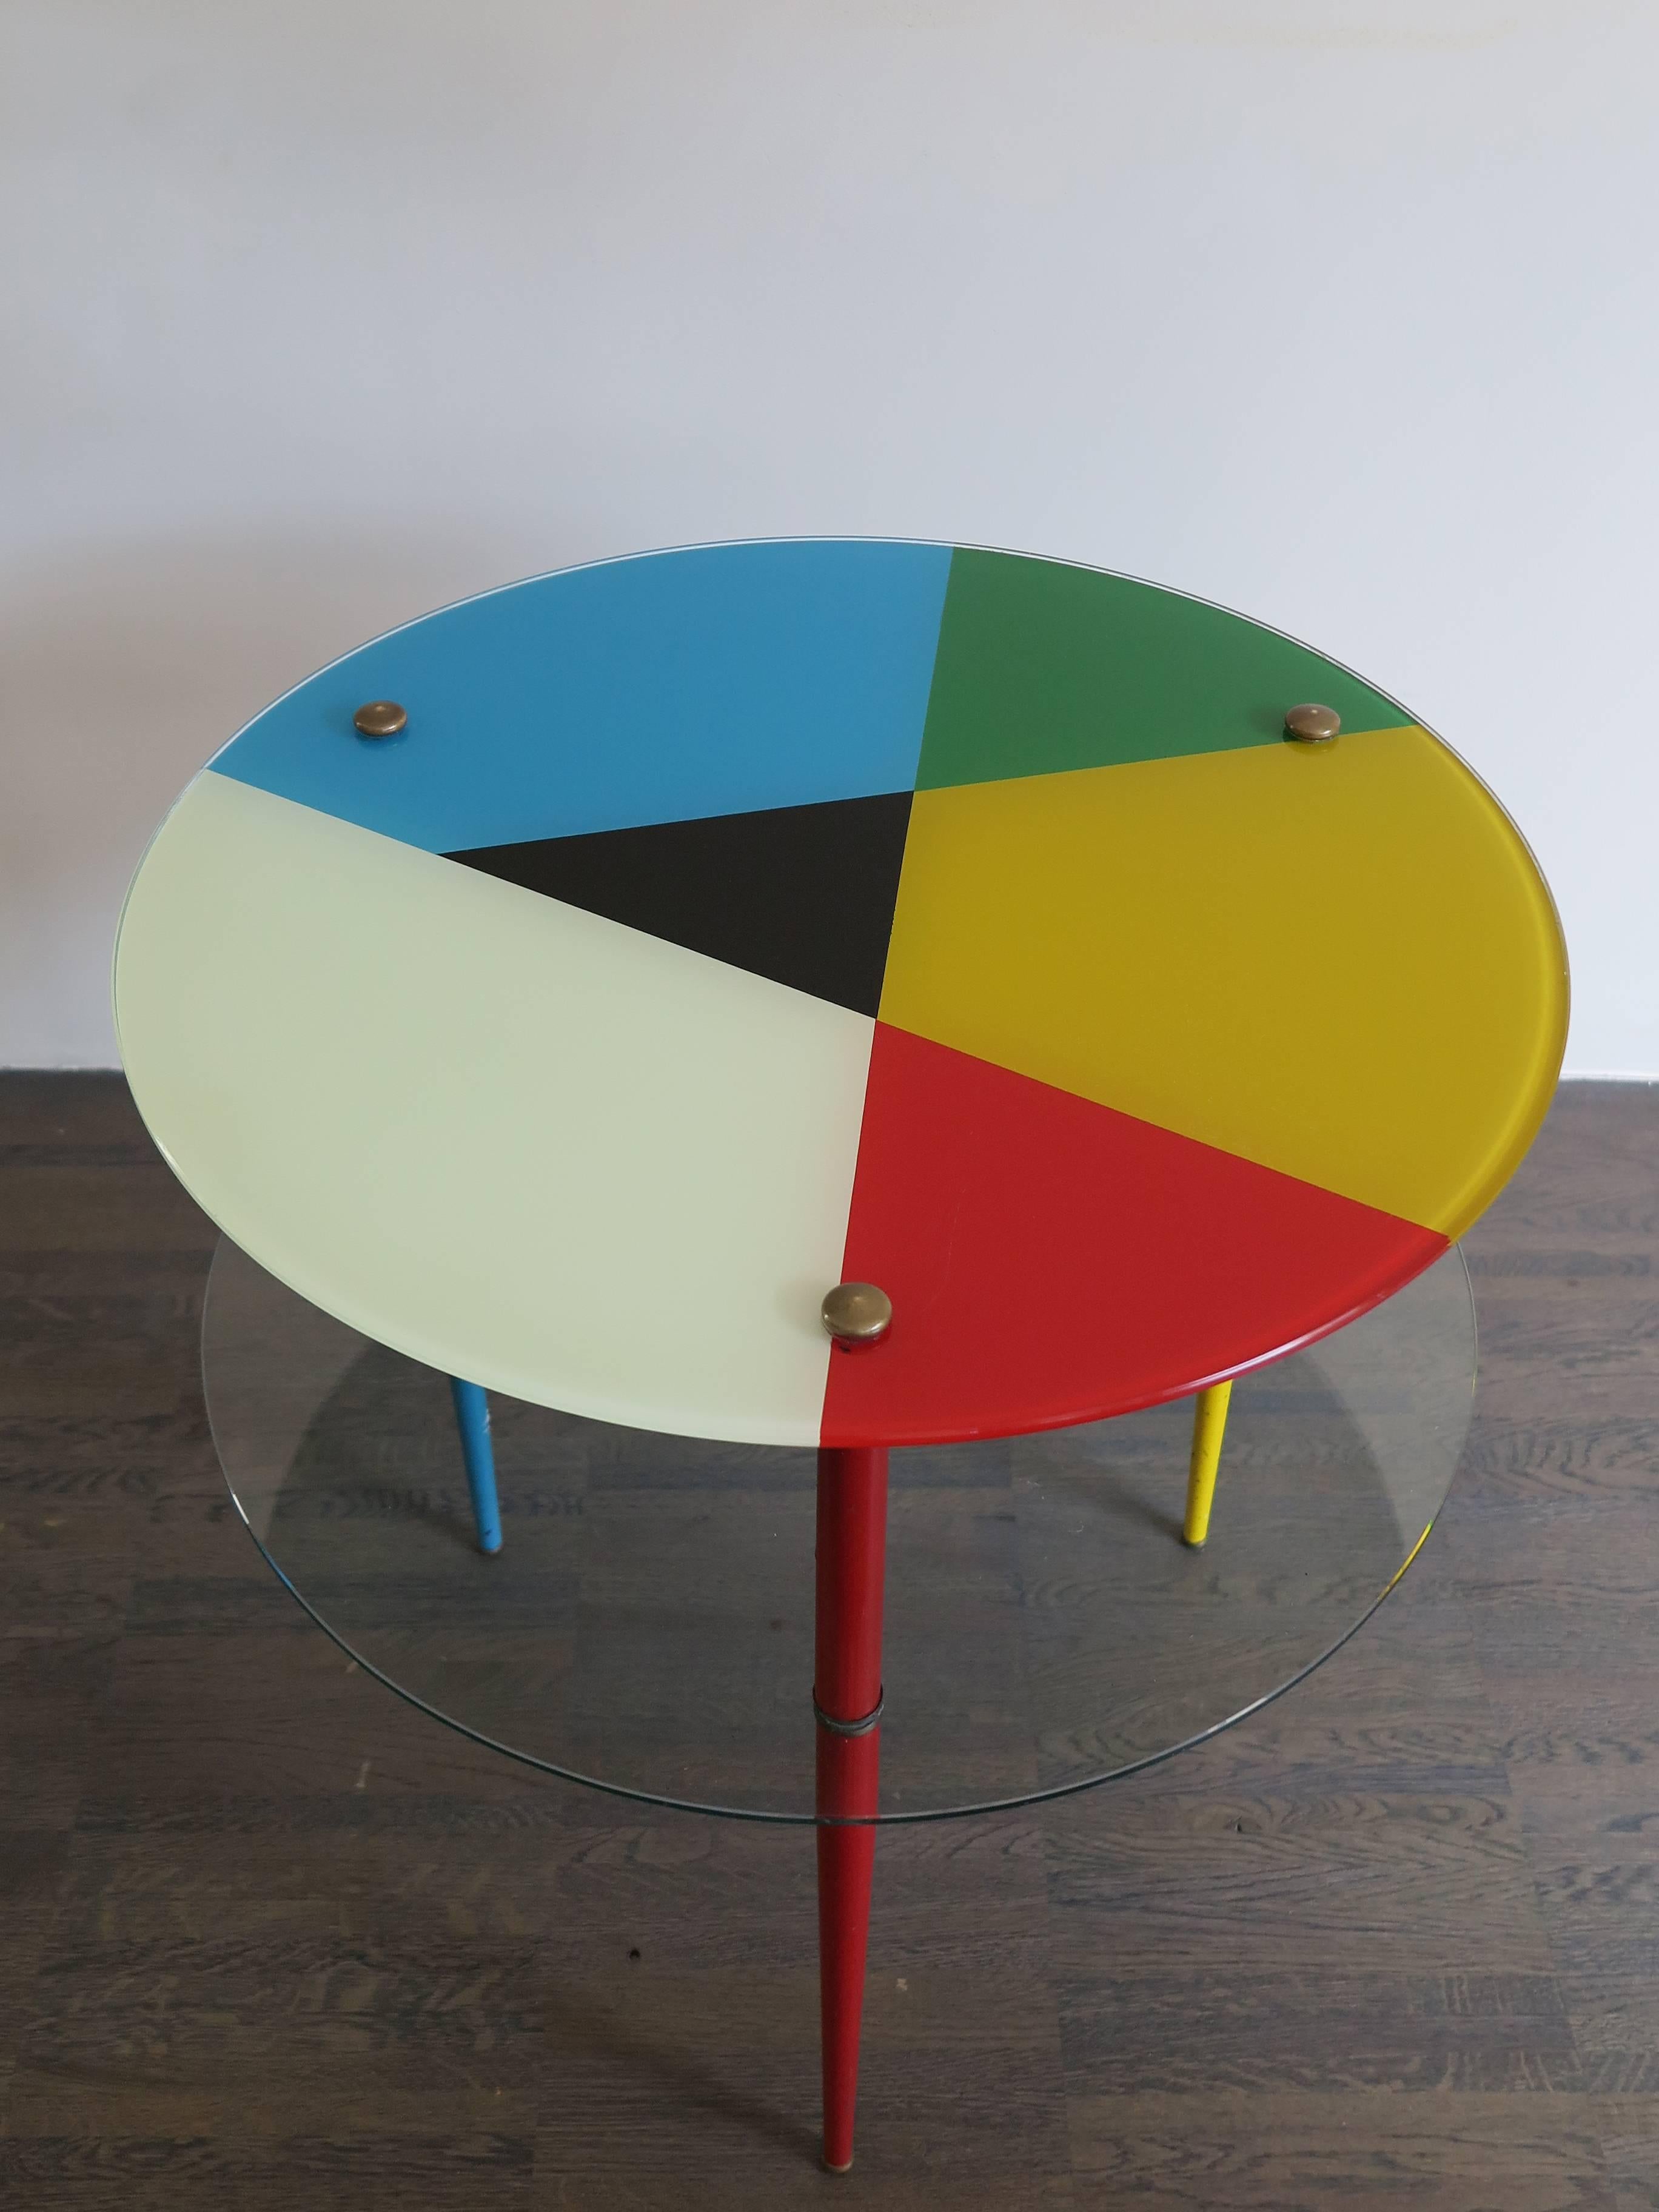 1960s Italian midcentury design coffee table designed by Paoli Edoardo for Vitrex model “Arlecchino” with painted metal legs and brass details, tempered glasses, back-painted top.
Some signs due to normal use over time.